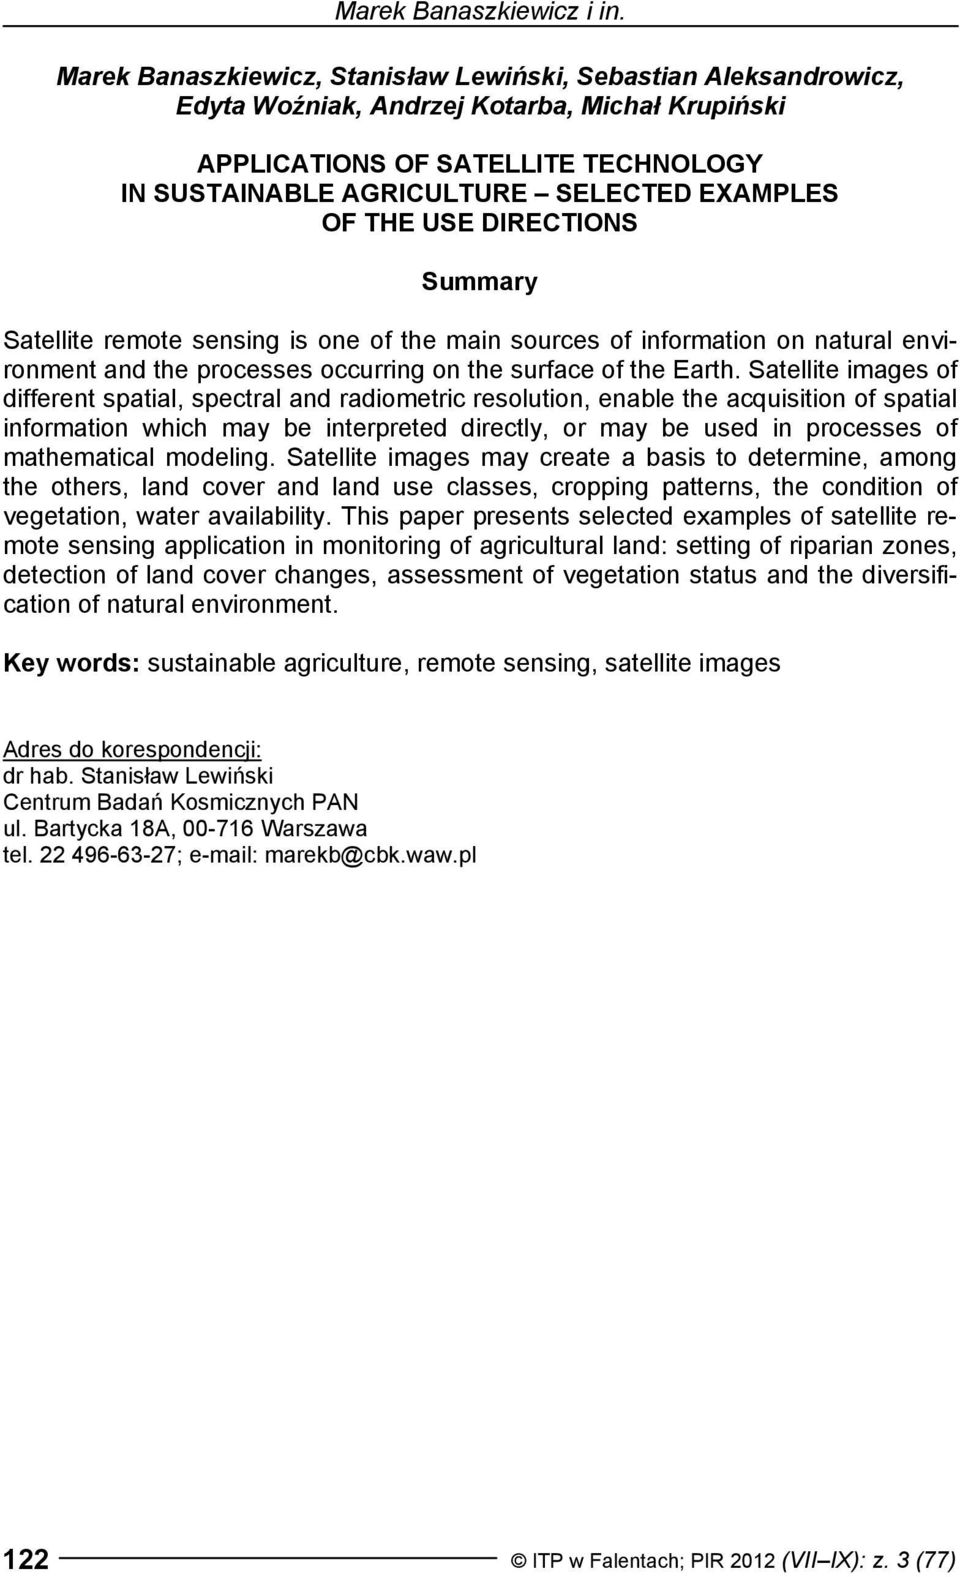 OF THE USE DIRECTIONS Summary Satellite remote sensing is one of the main sources of information on natural environment and the processes occurring on the surface of the Earth.